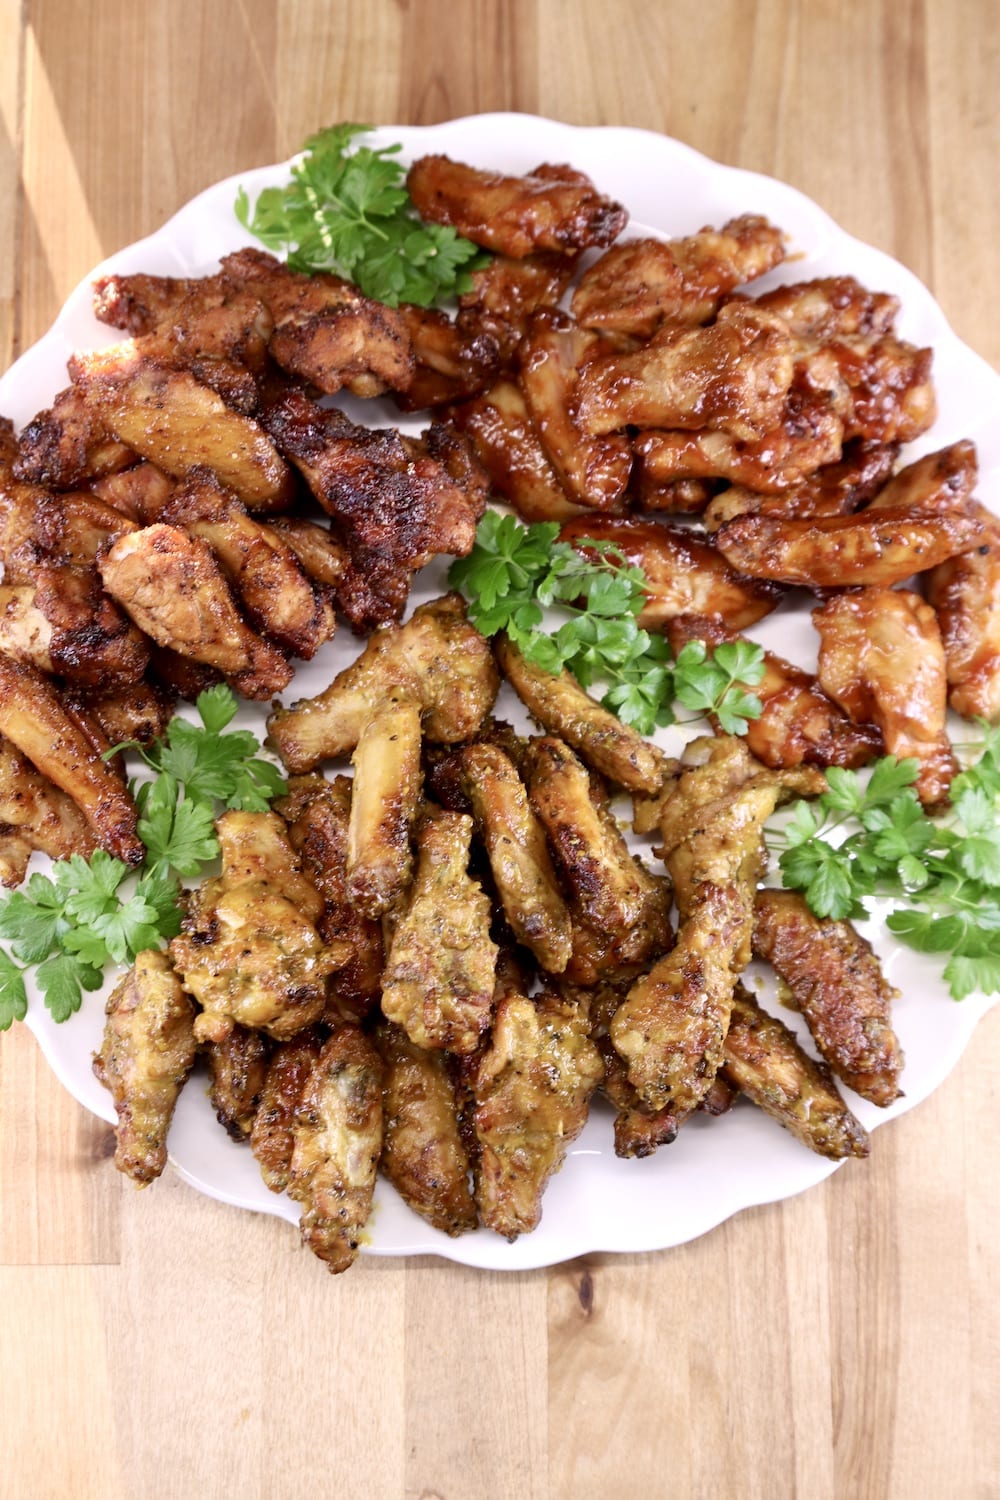 Platter of chicken wings garnished with parsley, overhead view